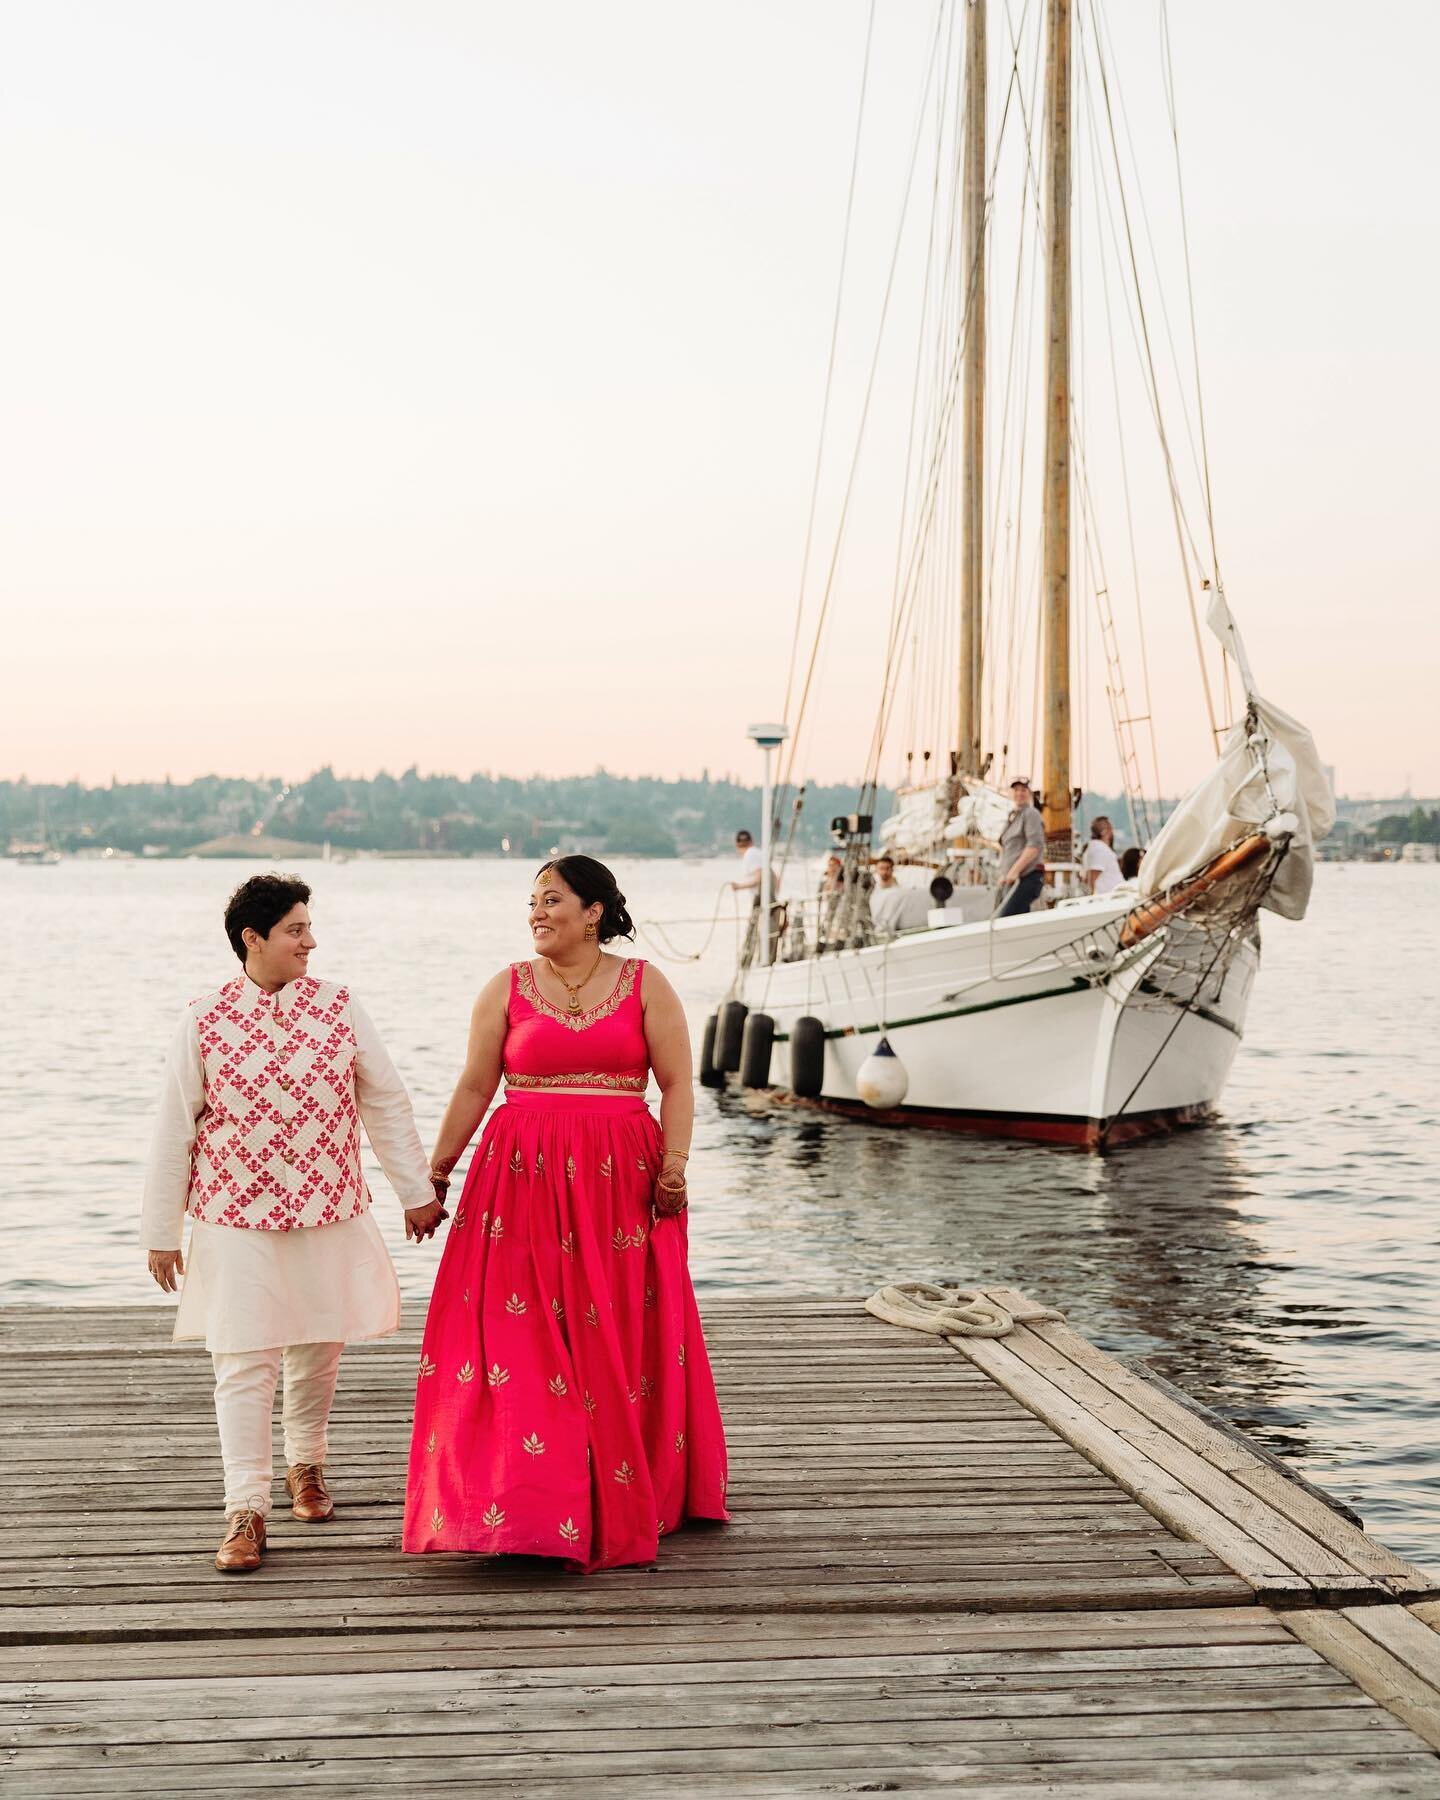 Quick! It&rsquo;s sunny outside! Post all your summer time wedding photos to manifest warmer weather from here on out 🌞🌞🌞
.
#weddingphotography #weddingphotographer #lgbtqwedding #seattlewedding #portlandweddingphotographer #seattleweddingphotogra